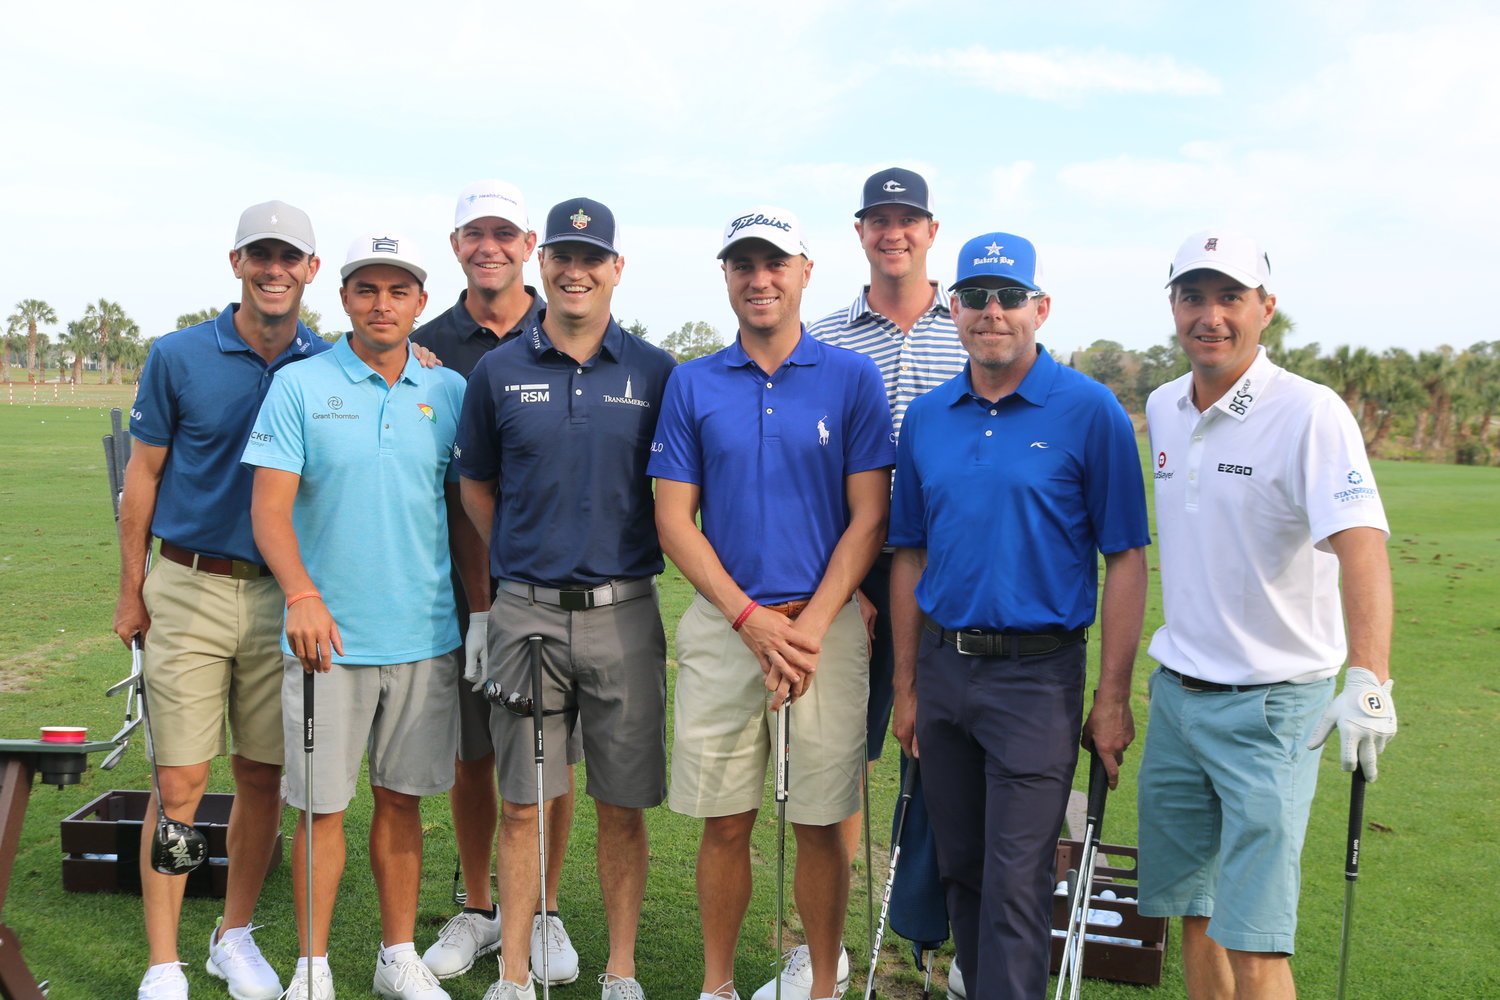 Billy Horschel, Rickie Fowler, Lucas Glover, Zach Johnson, Justin Thomas, Harris English, Justin Leonard and Kevin Kisner at the golf tournament at Sawgrass Country Club